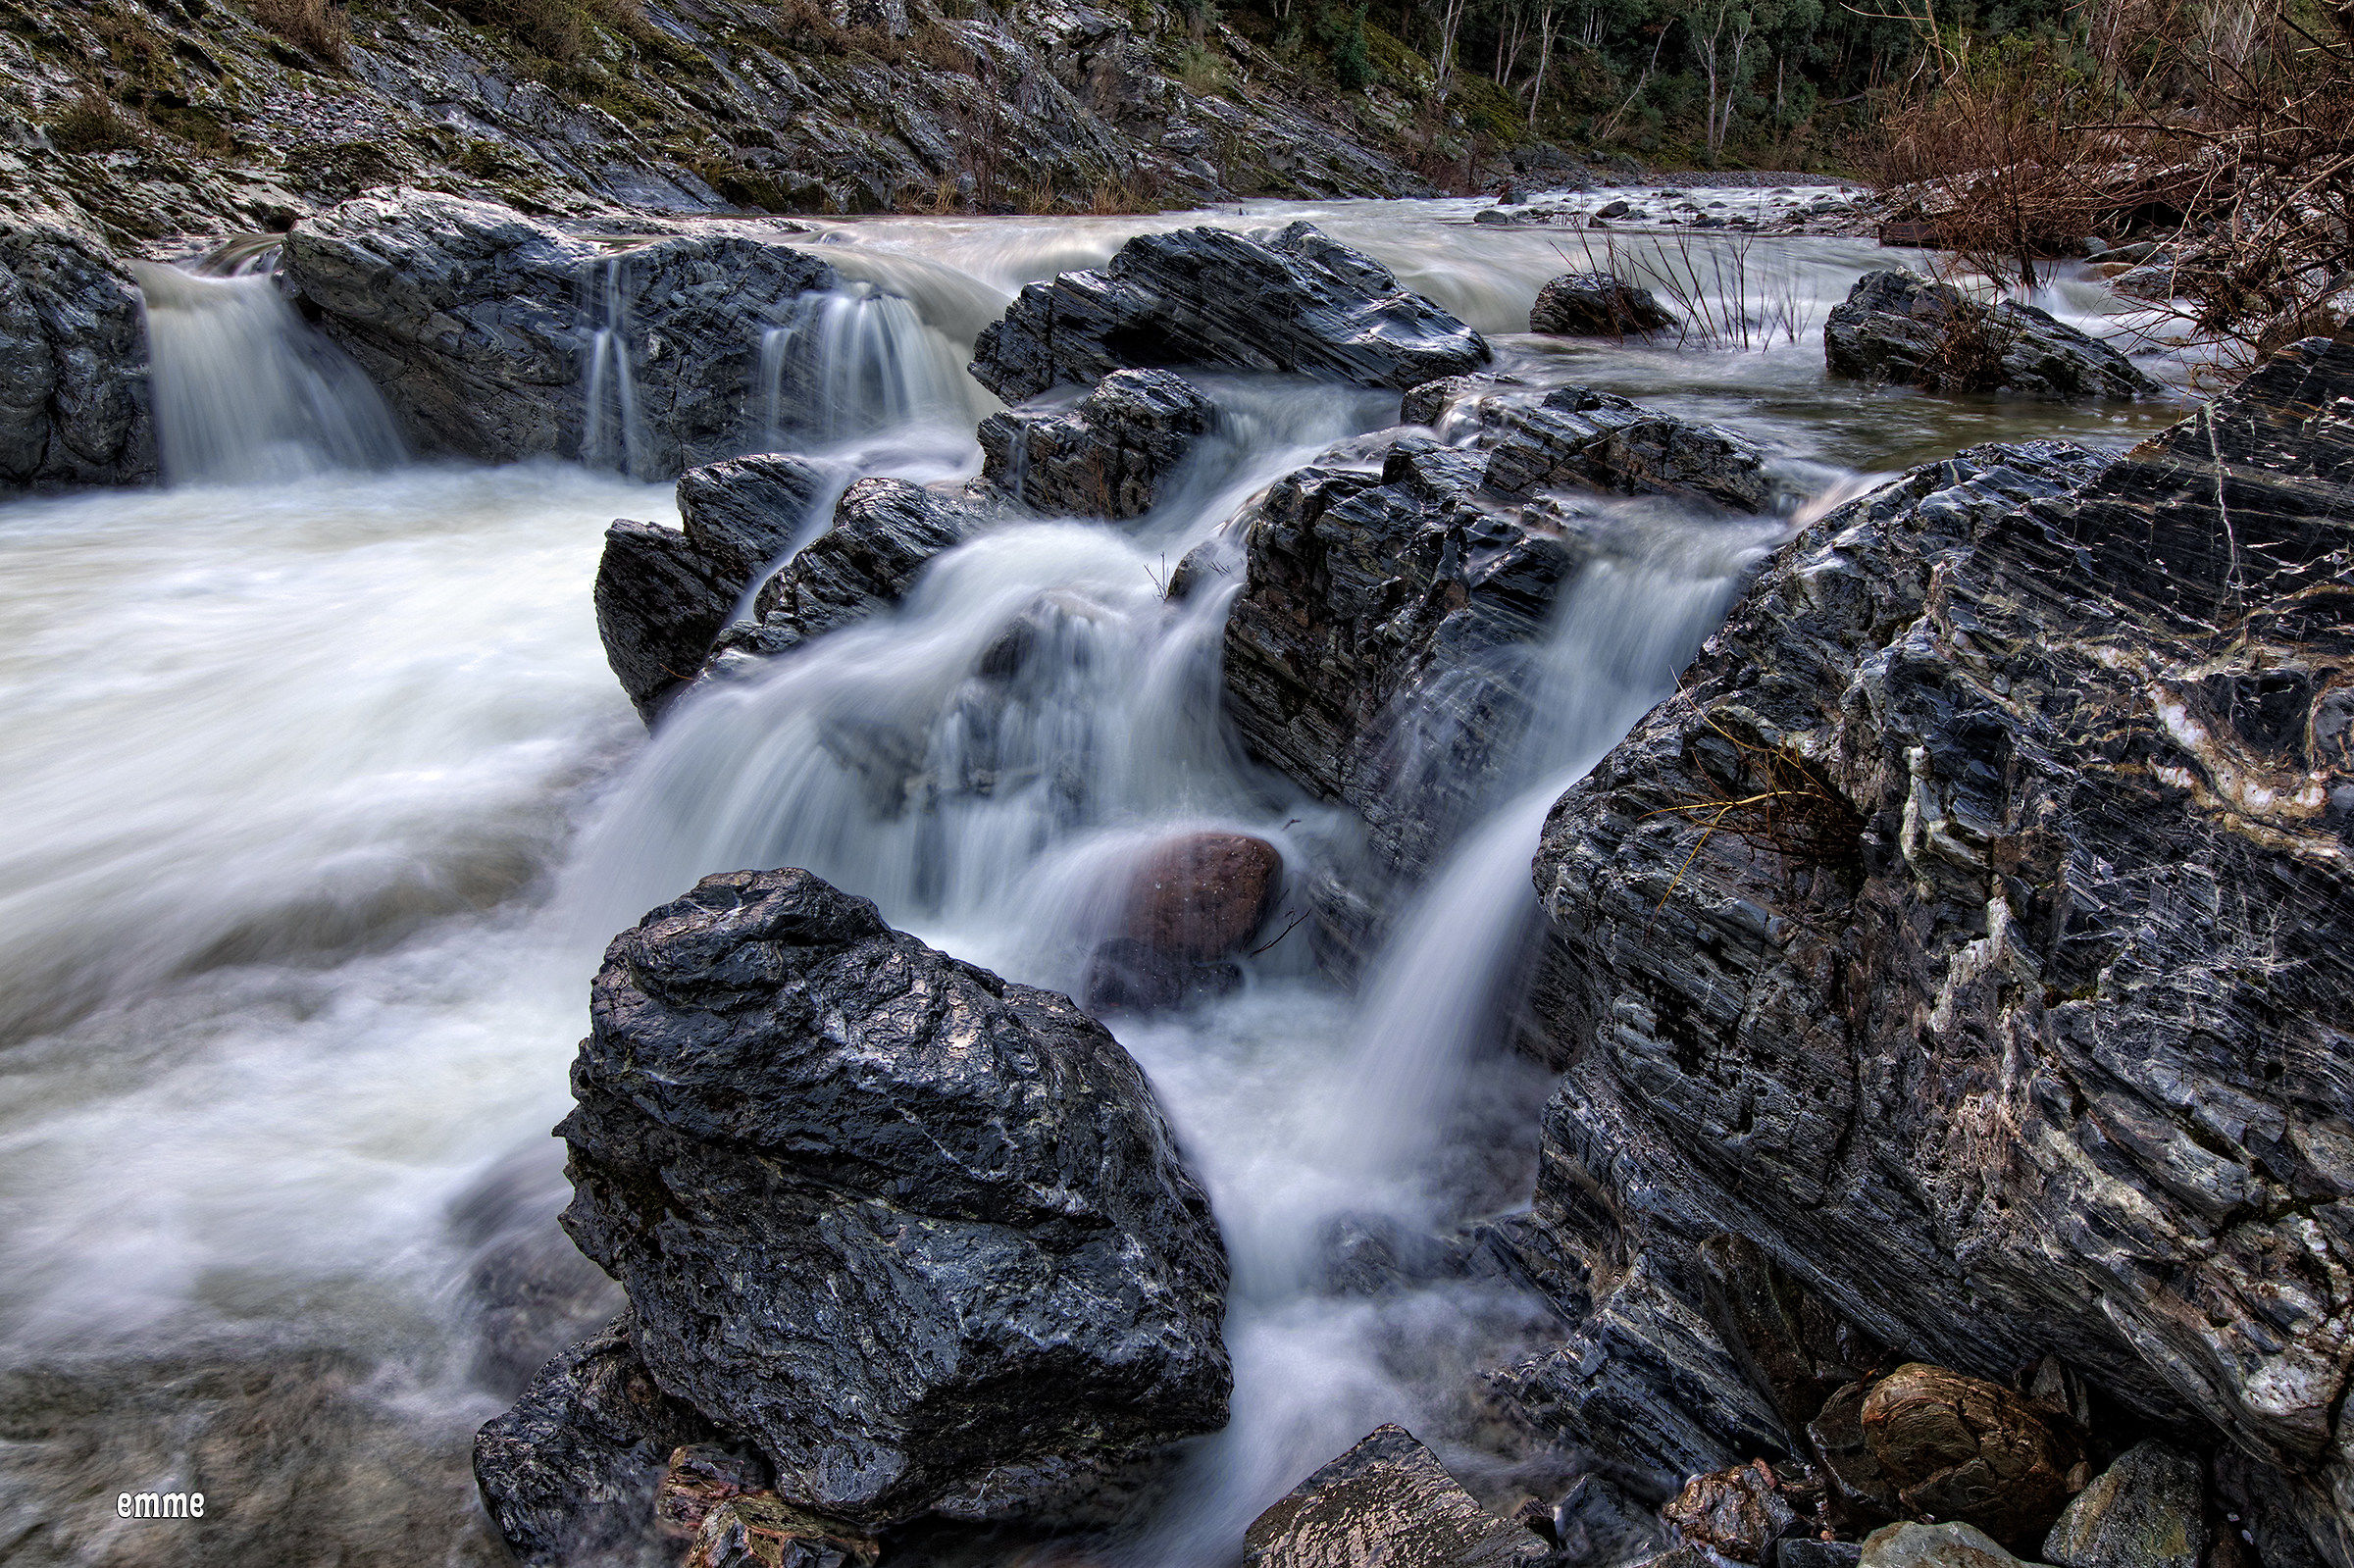 The rocks of the stream...